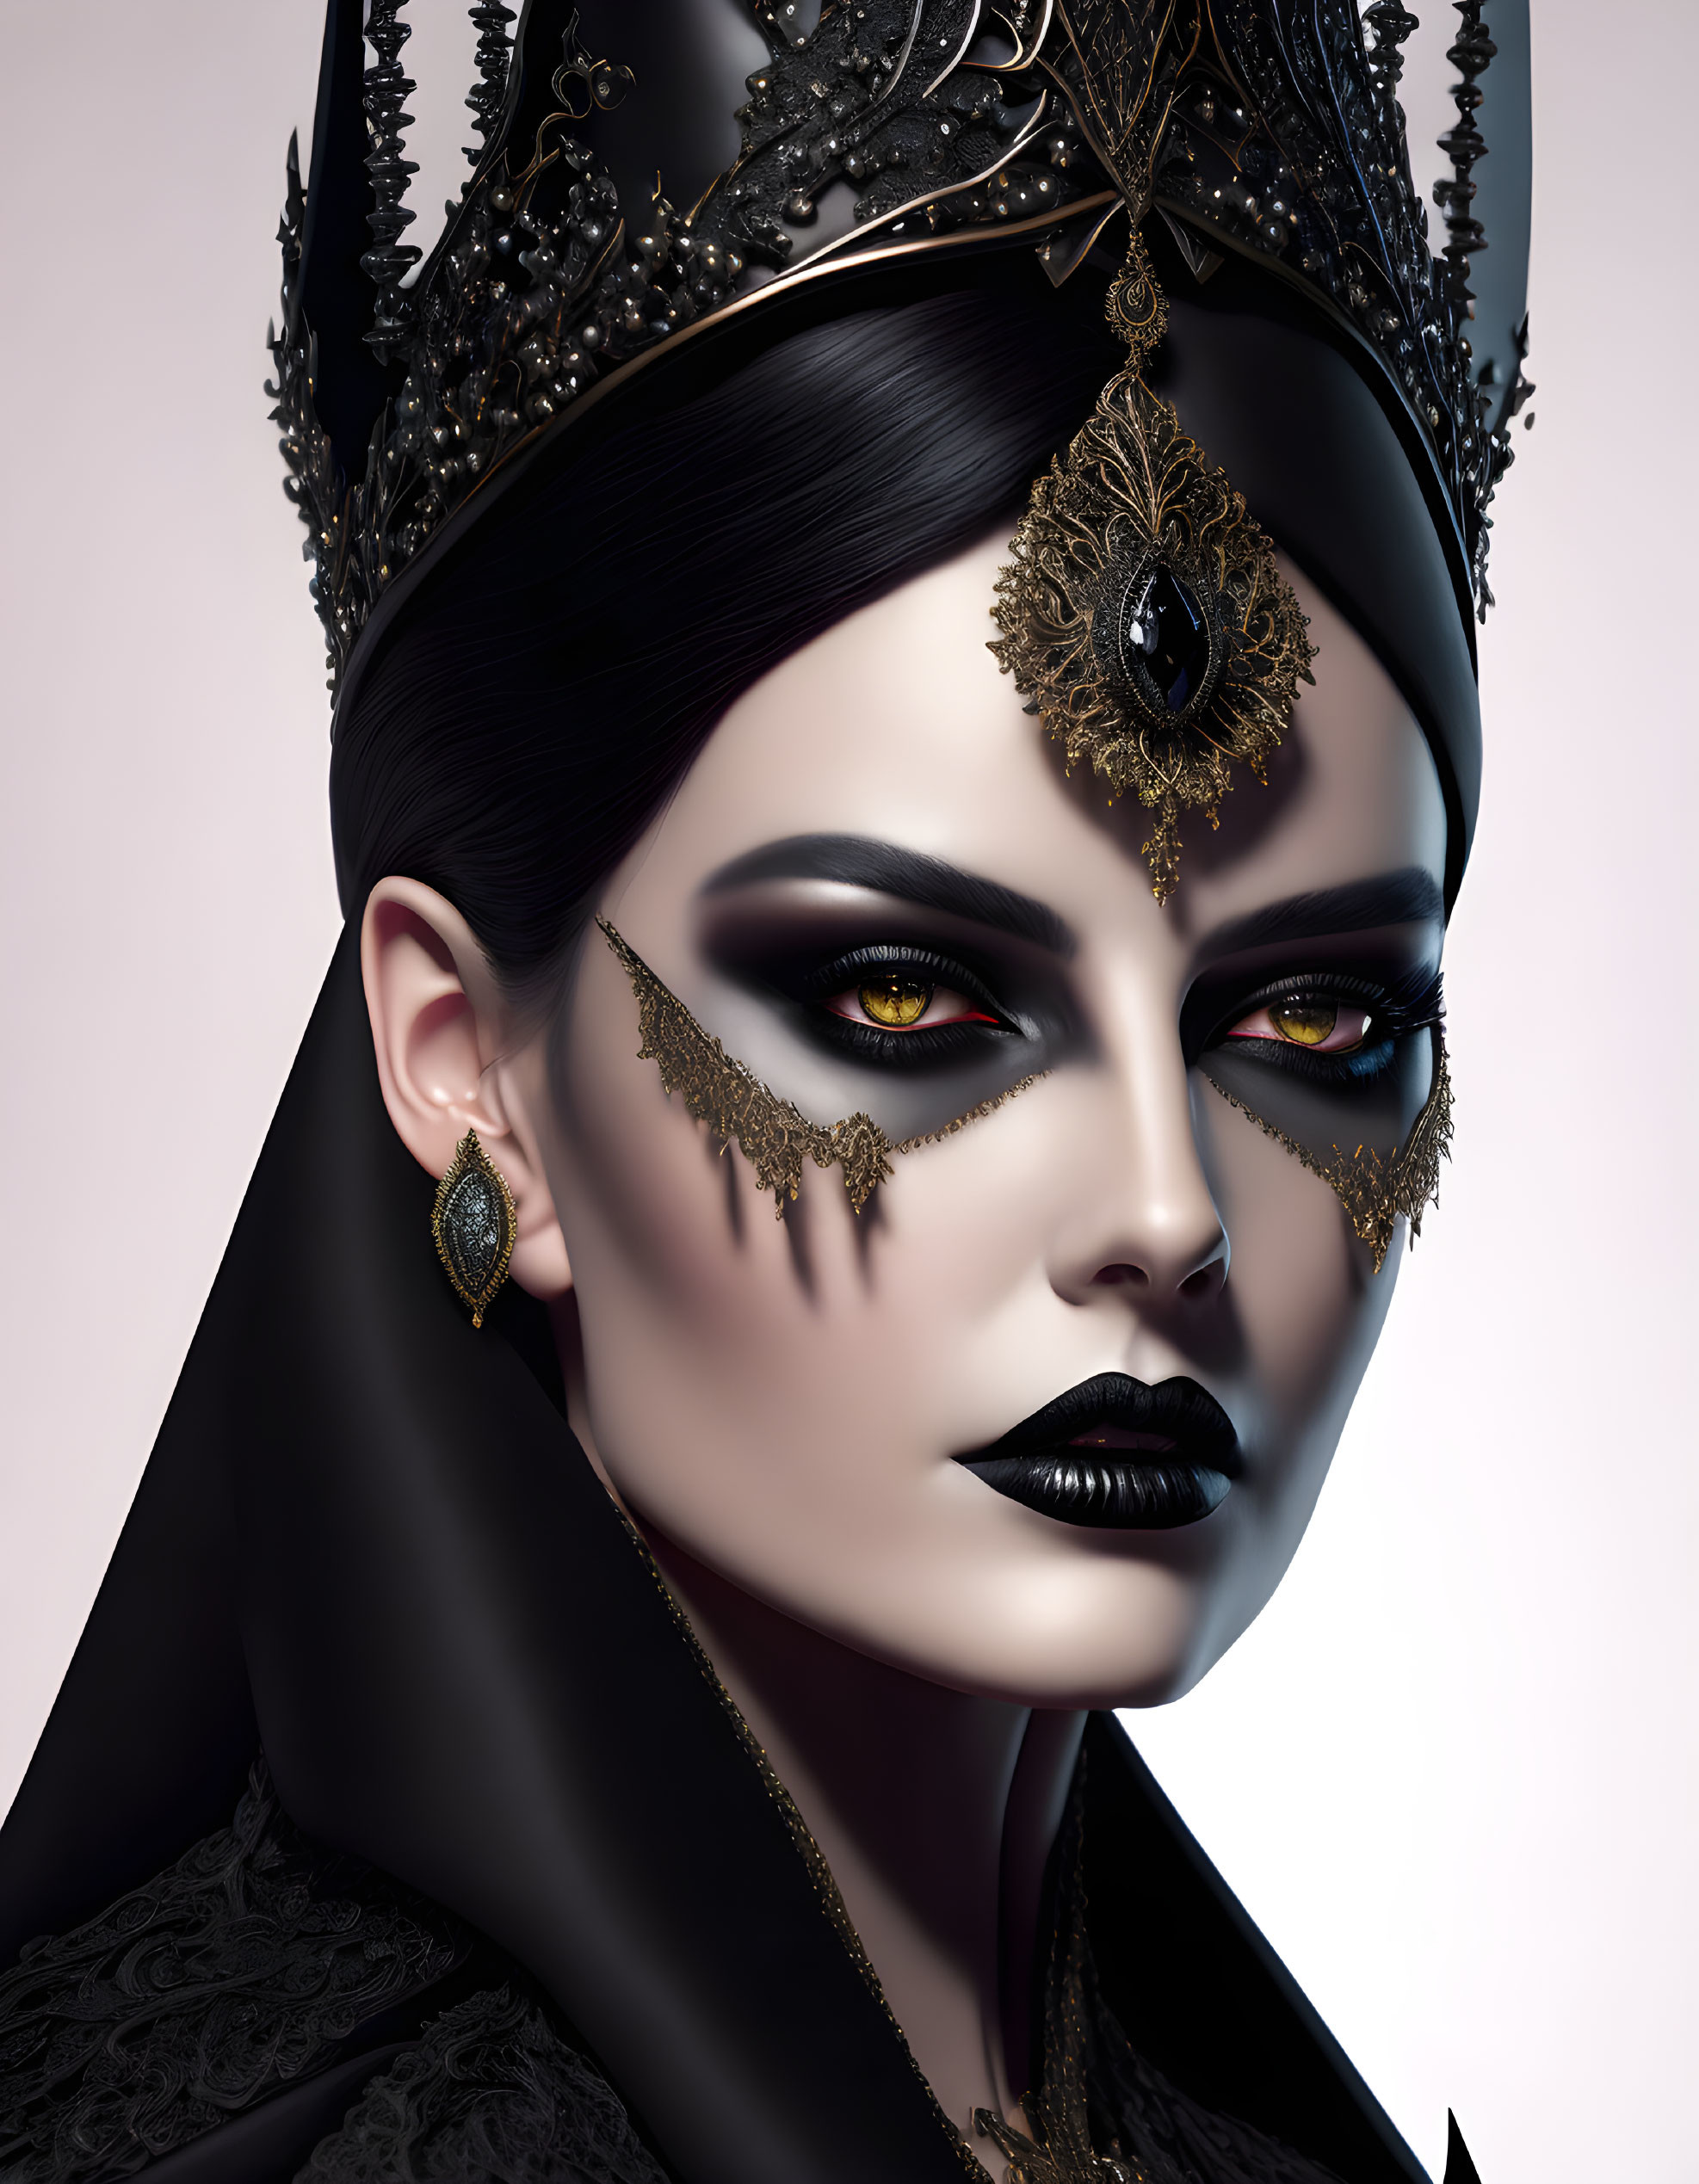 Digital portrait of woman with striking makeup, golden jewels, and dark crown